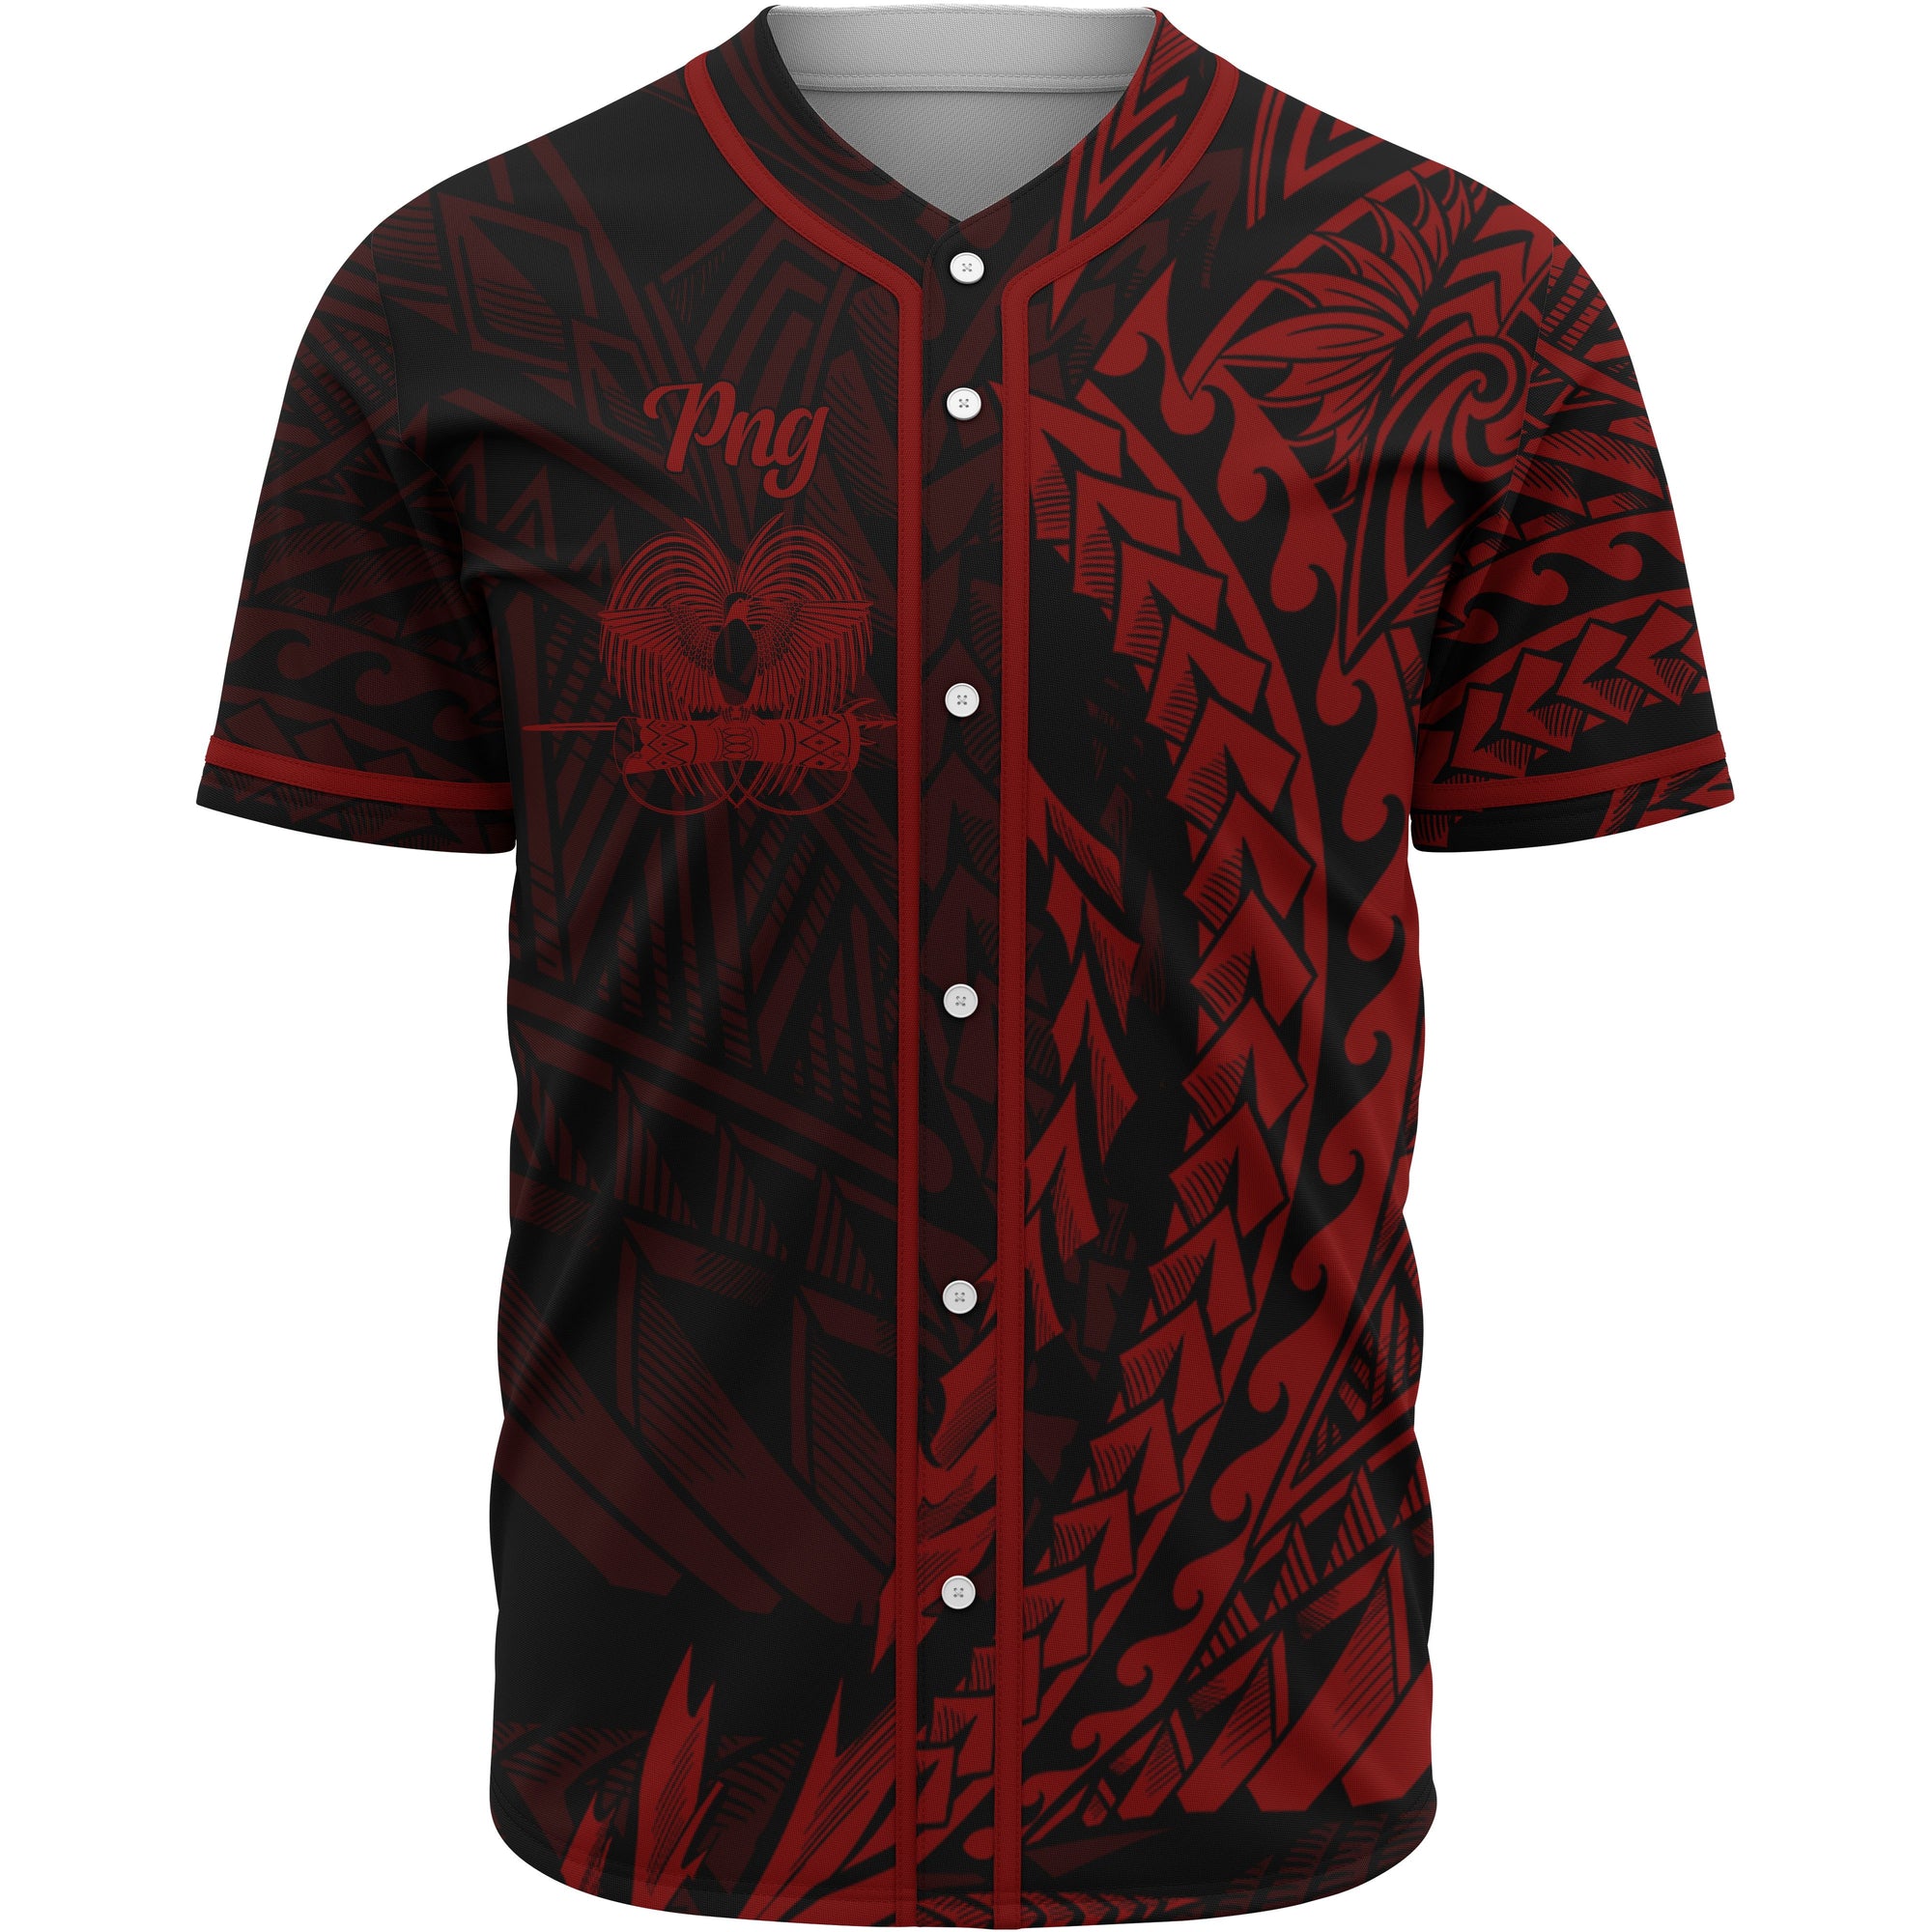 Papua New Guinea Baseball Shirt - Red Wings Style Unisex Gold - Polynesian Pride